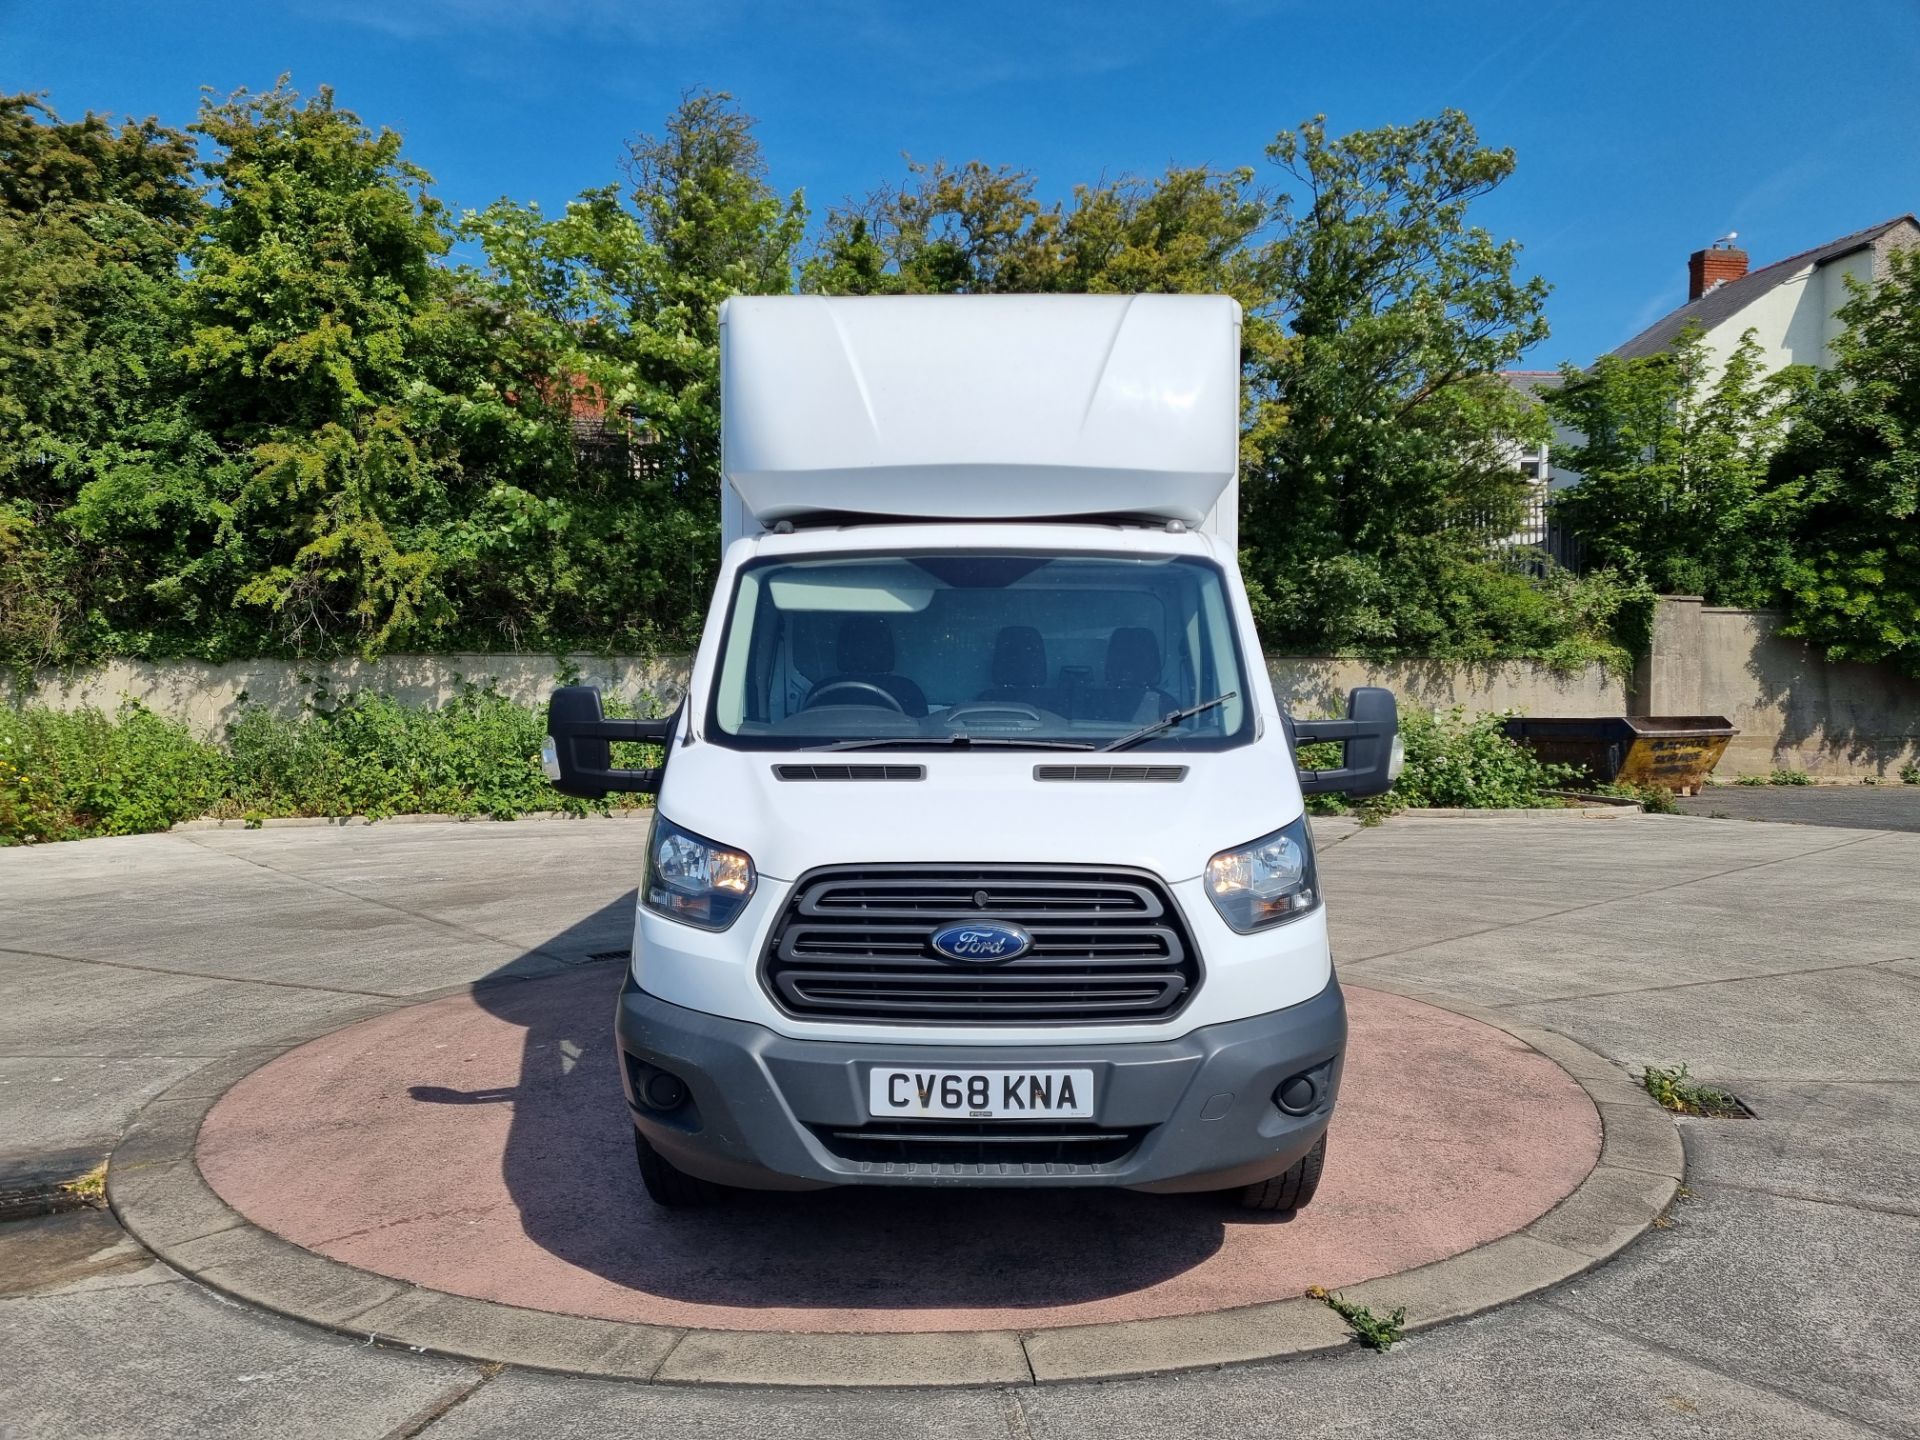 2018 Transit Luton with tail lift - Image 8 of 13